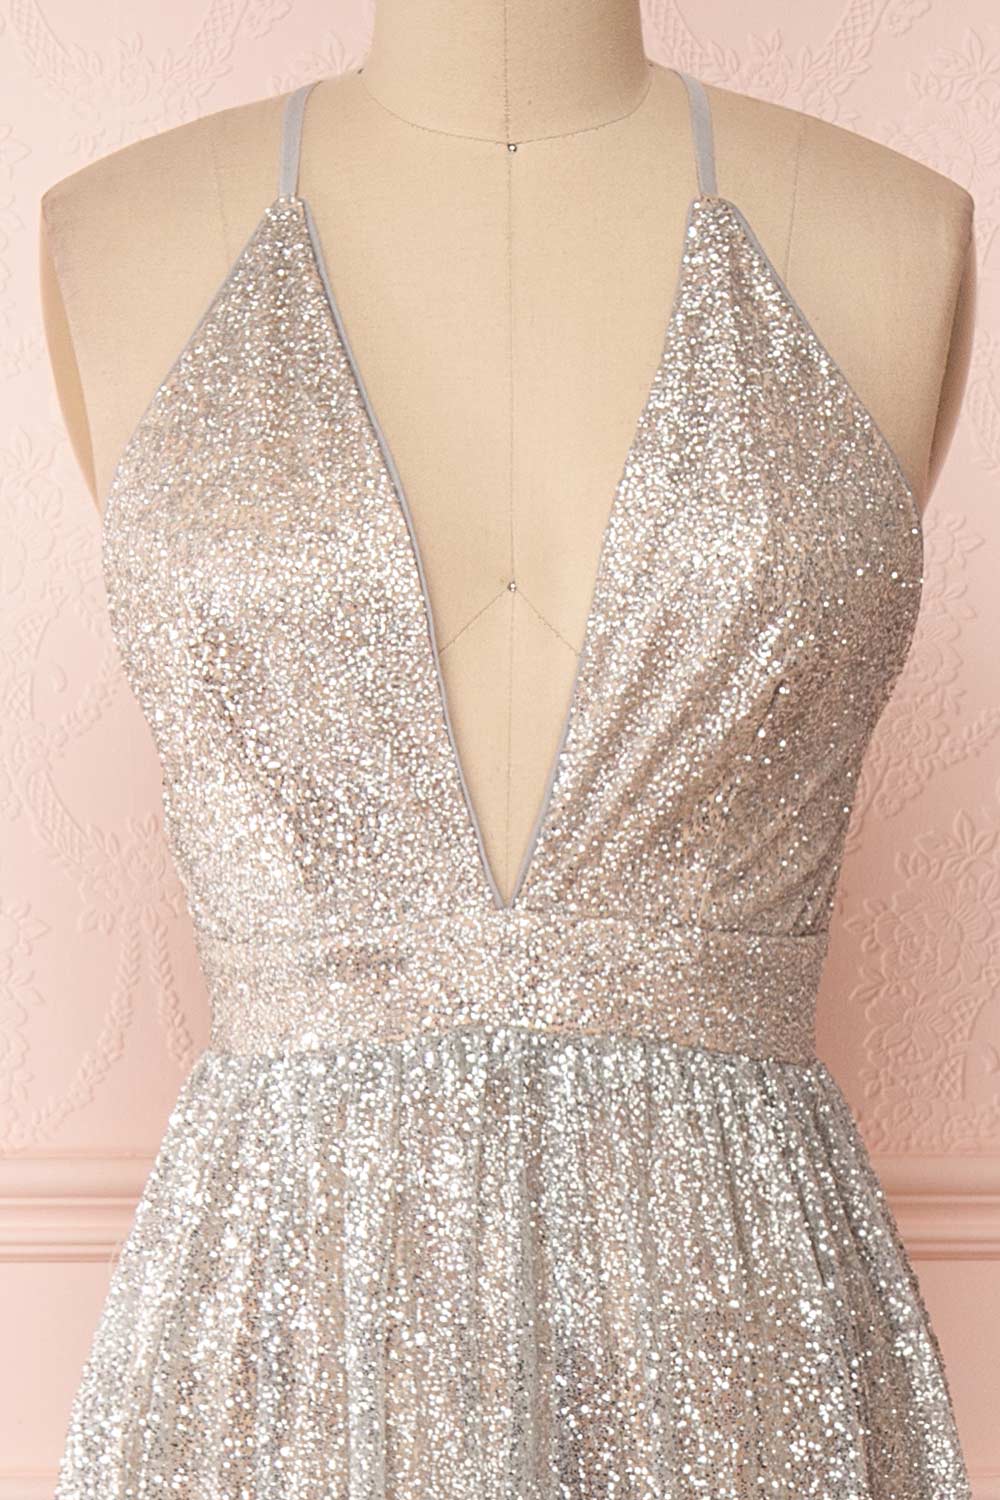 Anice Silver Glittery Dress | Robe Argent | Boutique 1861 front close-up